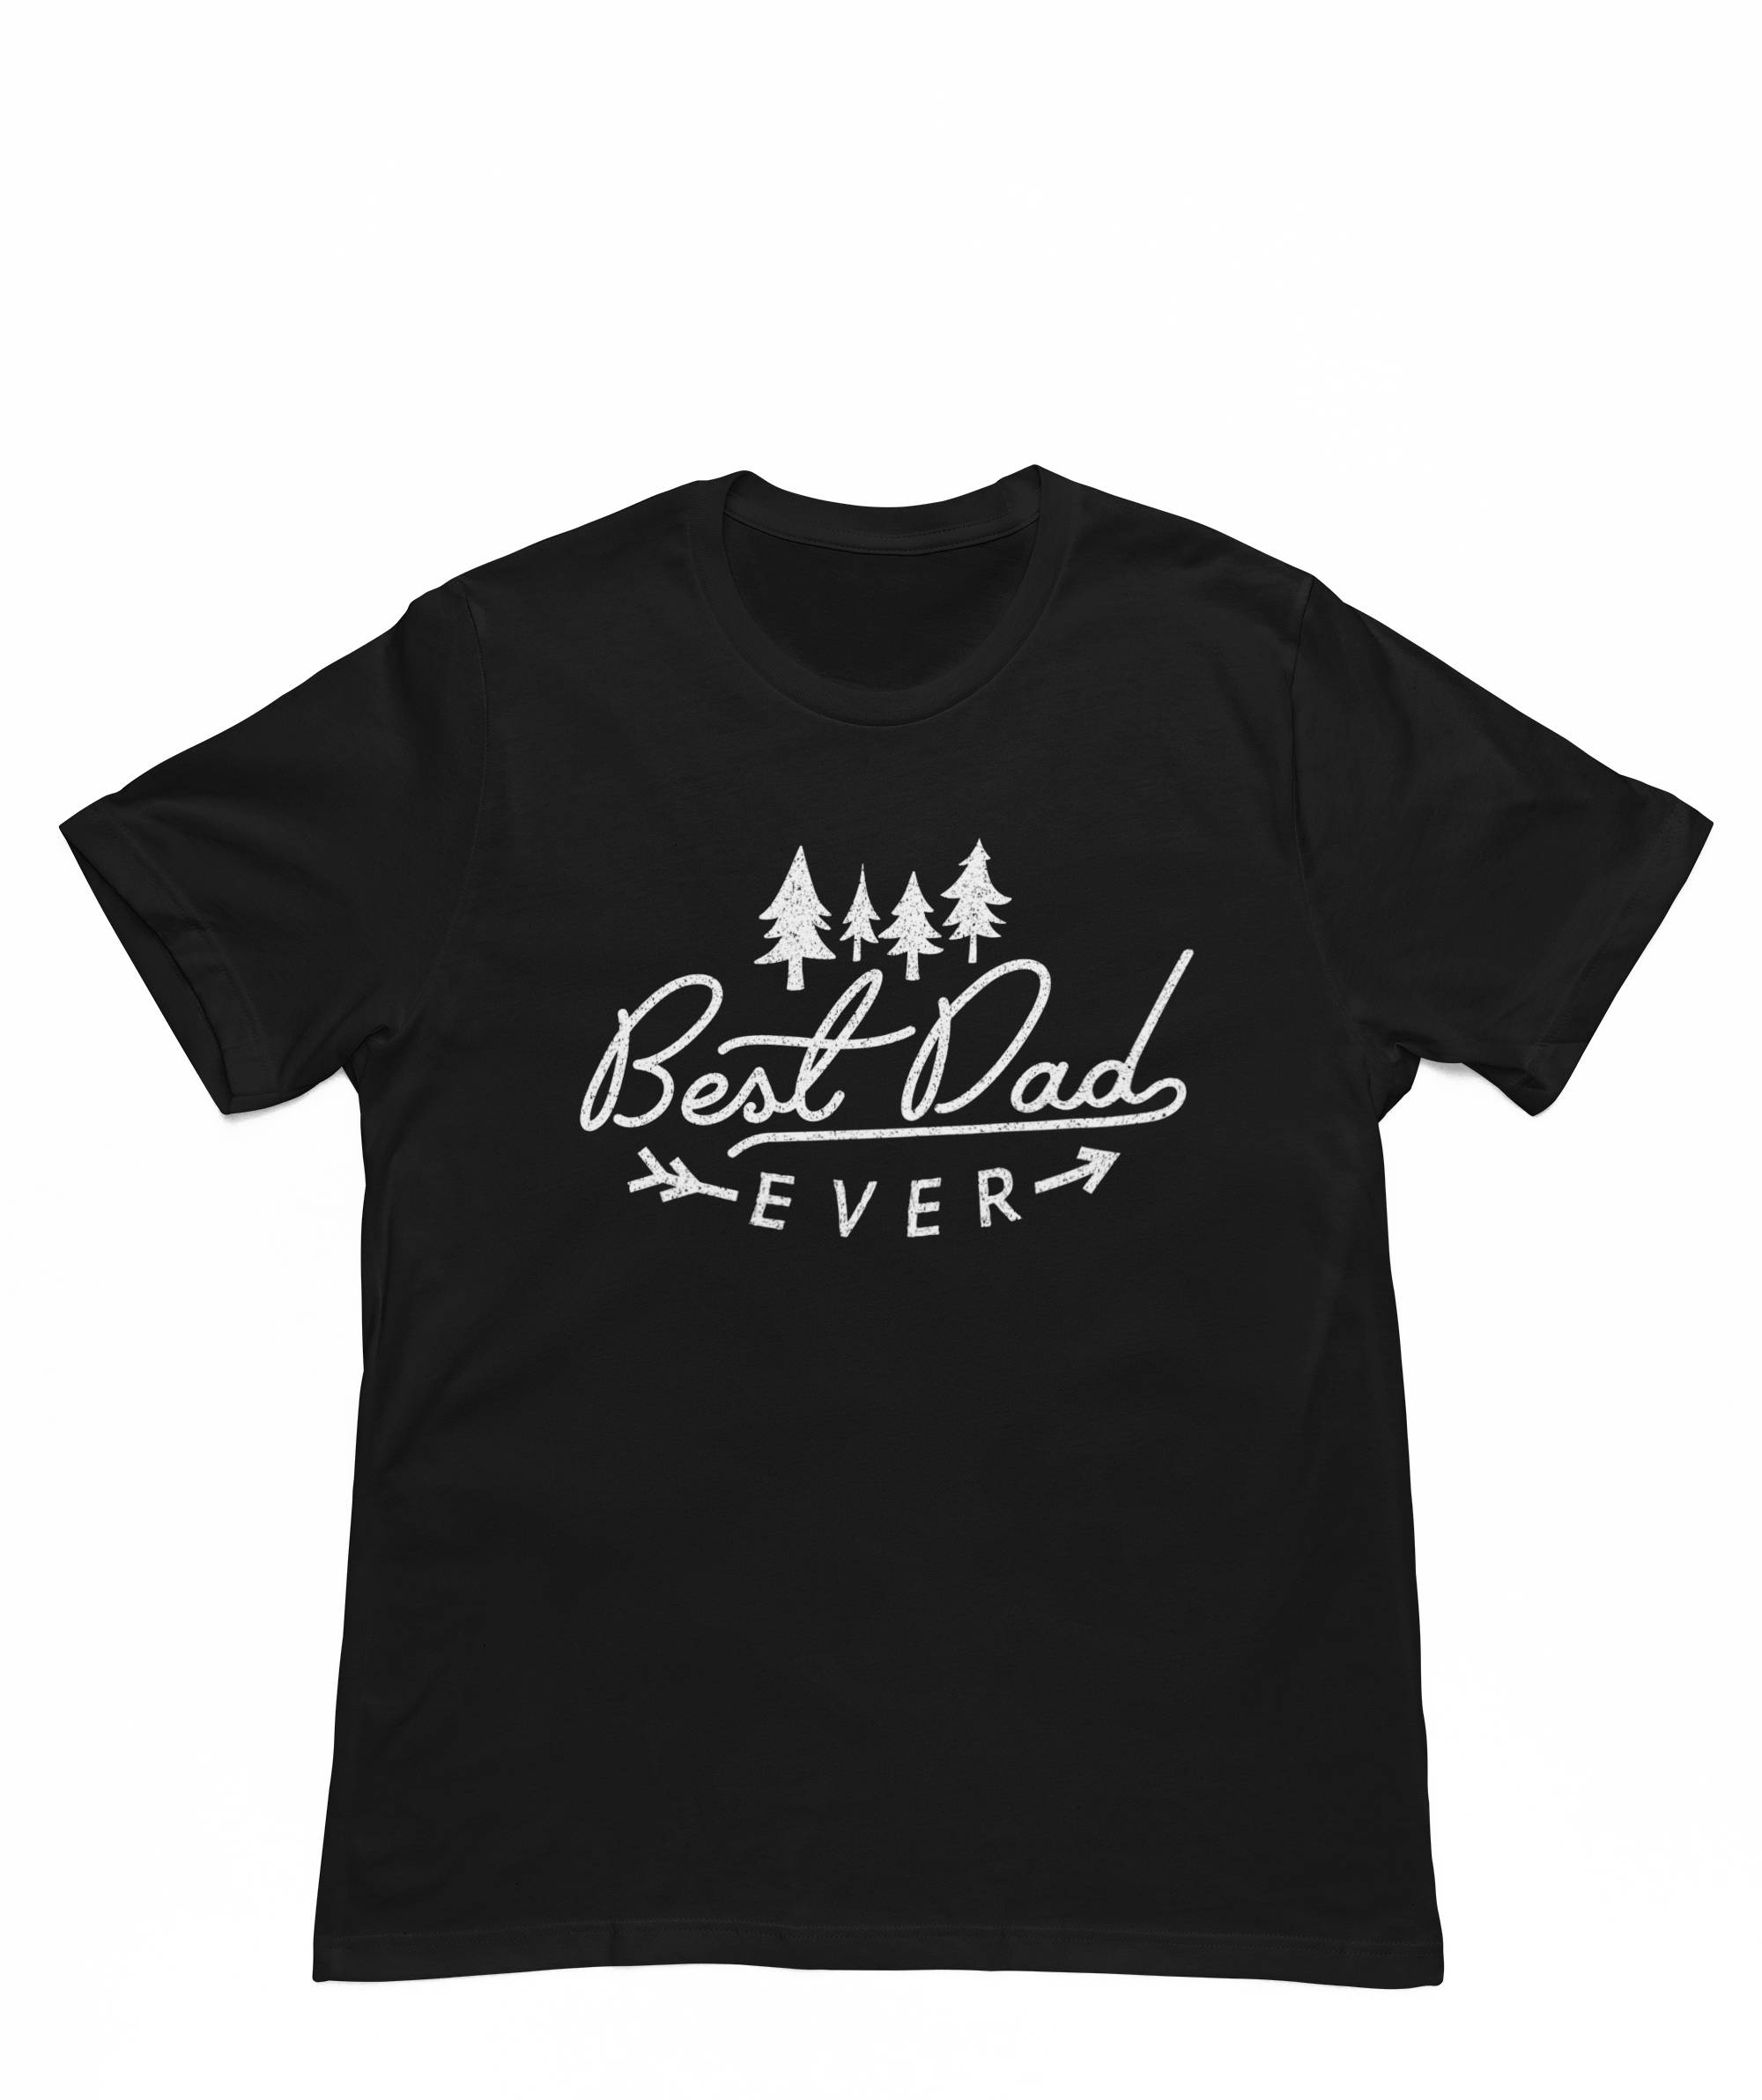 Best dad t-shirt - Father's Day gift